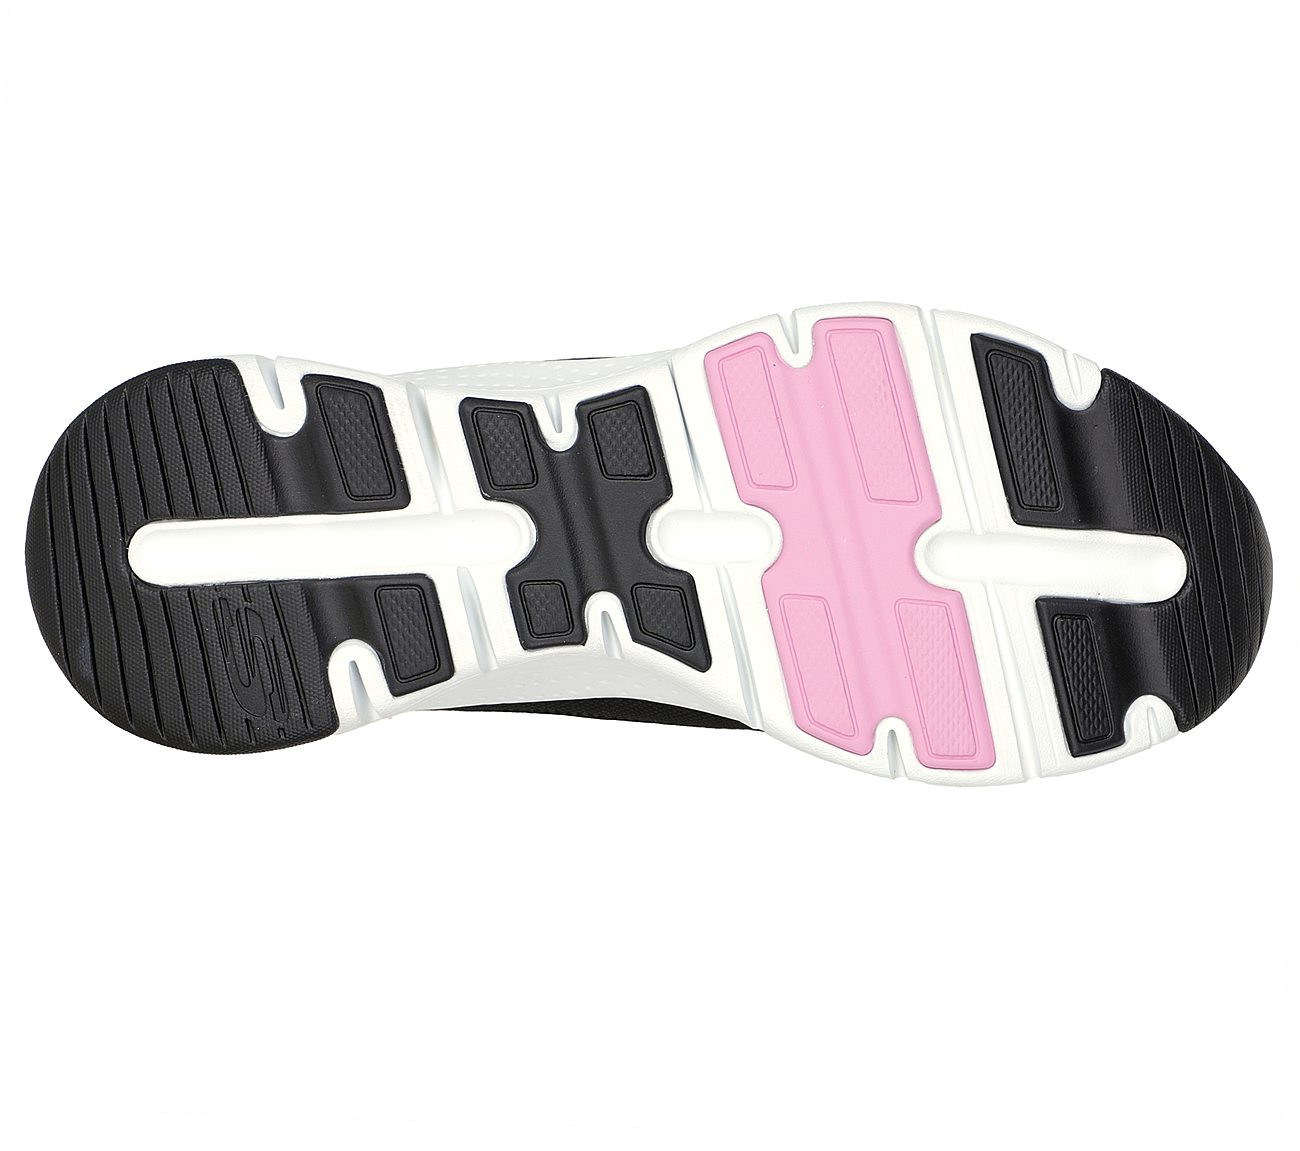 Arch Fit Sneakers, BKWP Black White Pink, 36